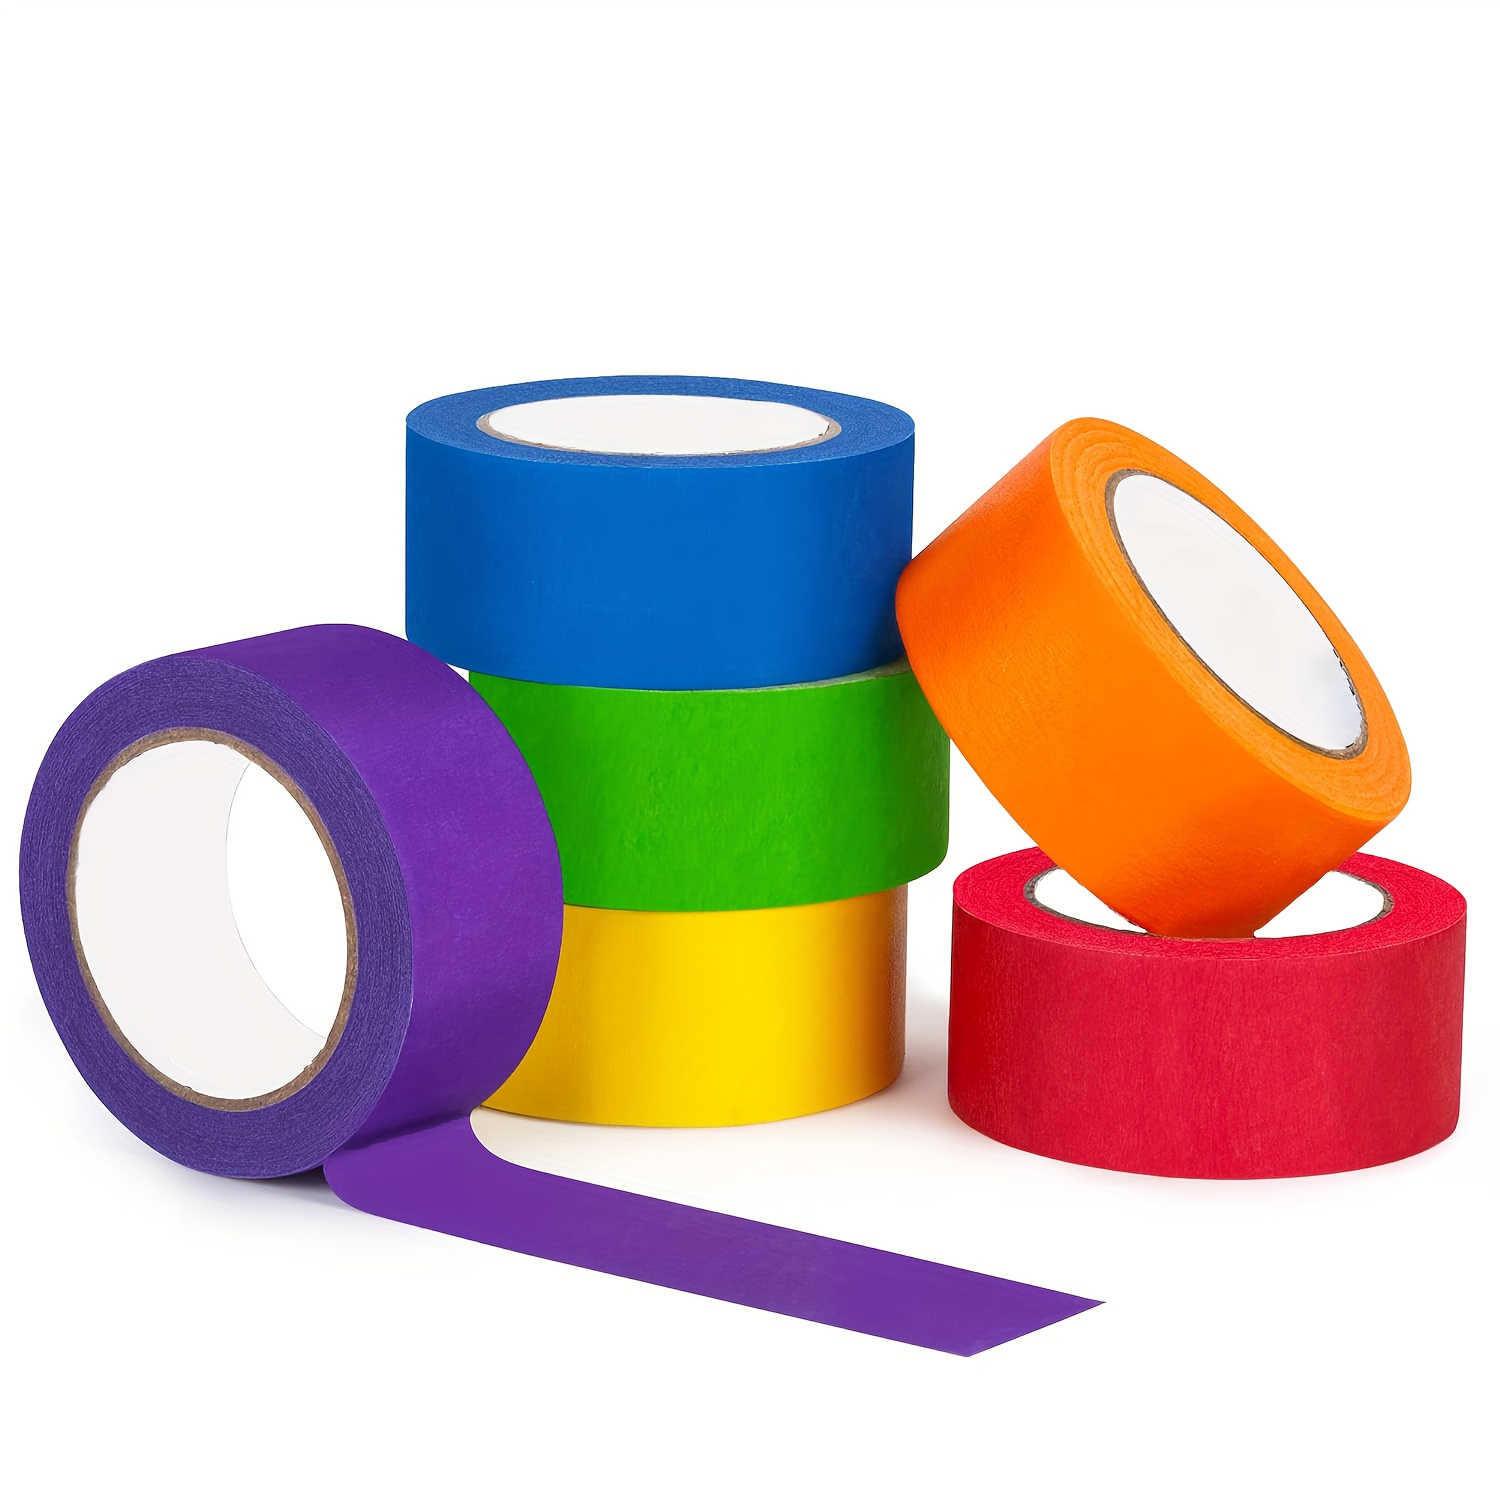 

6 Rolls Colored Masking Tape, Vitality Rainbow Colored Painter Tape Suitable For Arts And Crafts